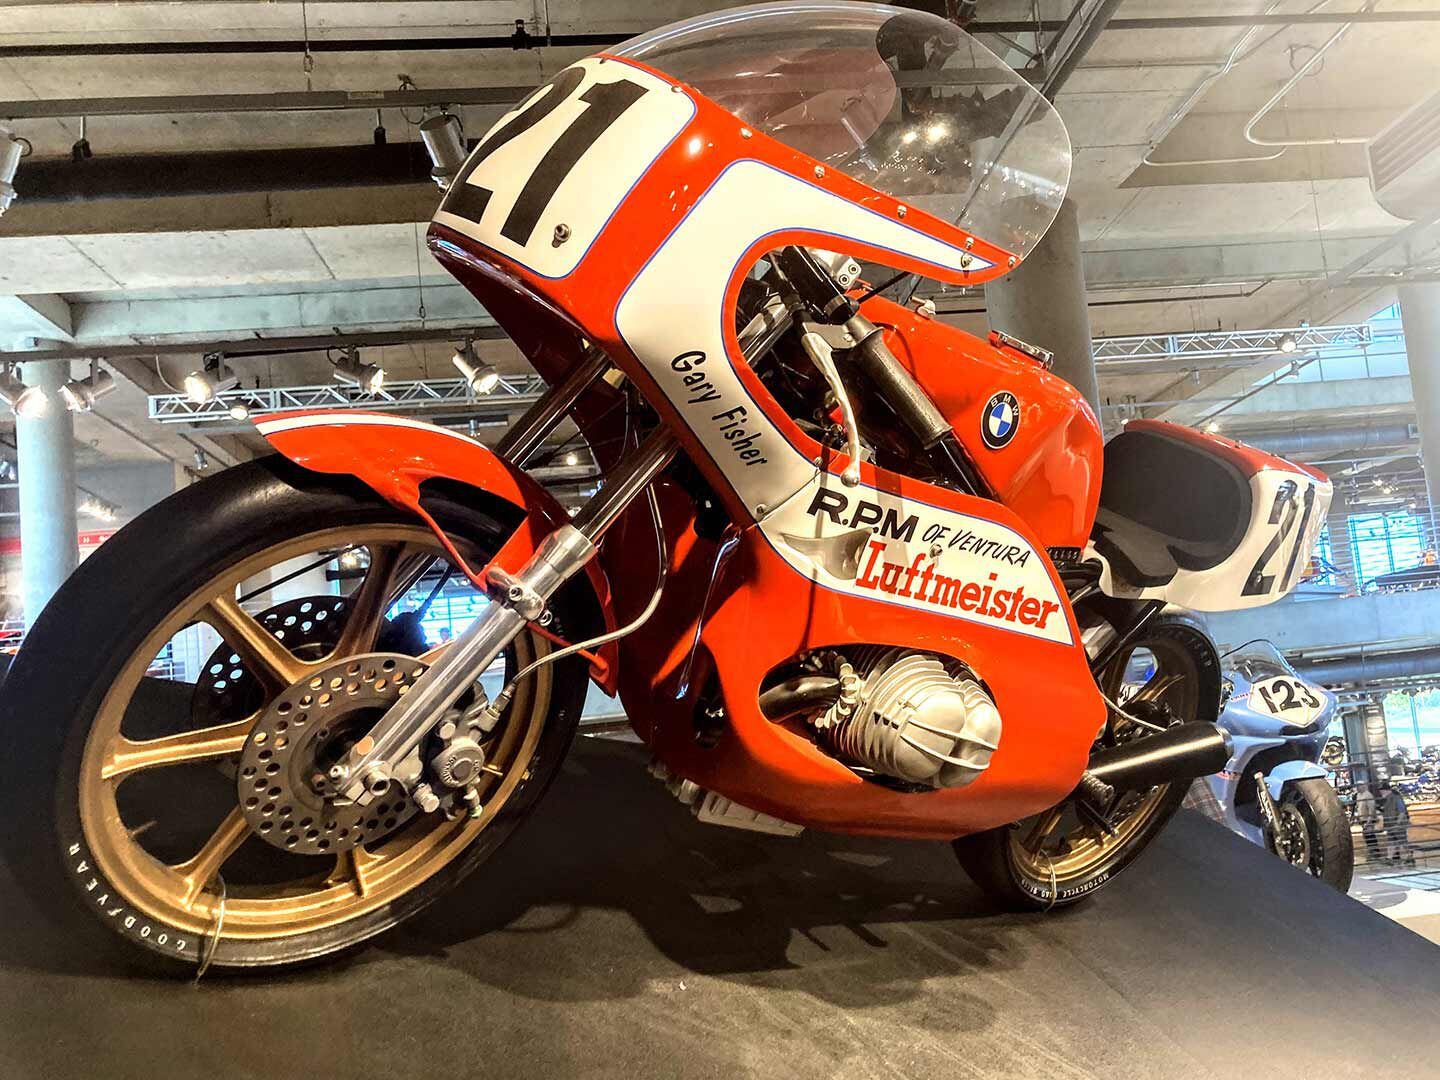 1974 BMW F-1 AMA racebike designed by famed builder Rob North. Fun fact, it’s one of two in existence and features a single rear shock.